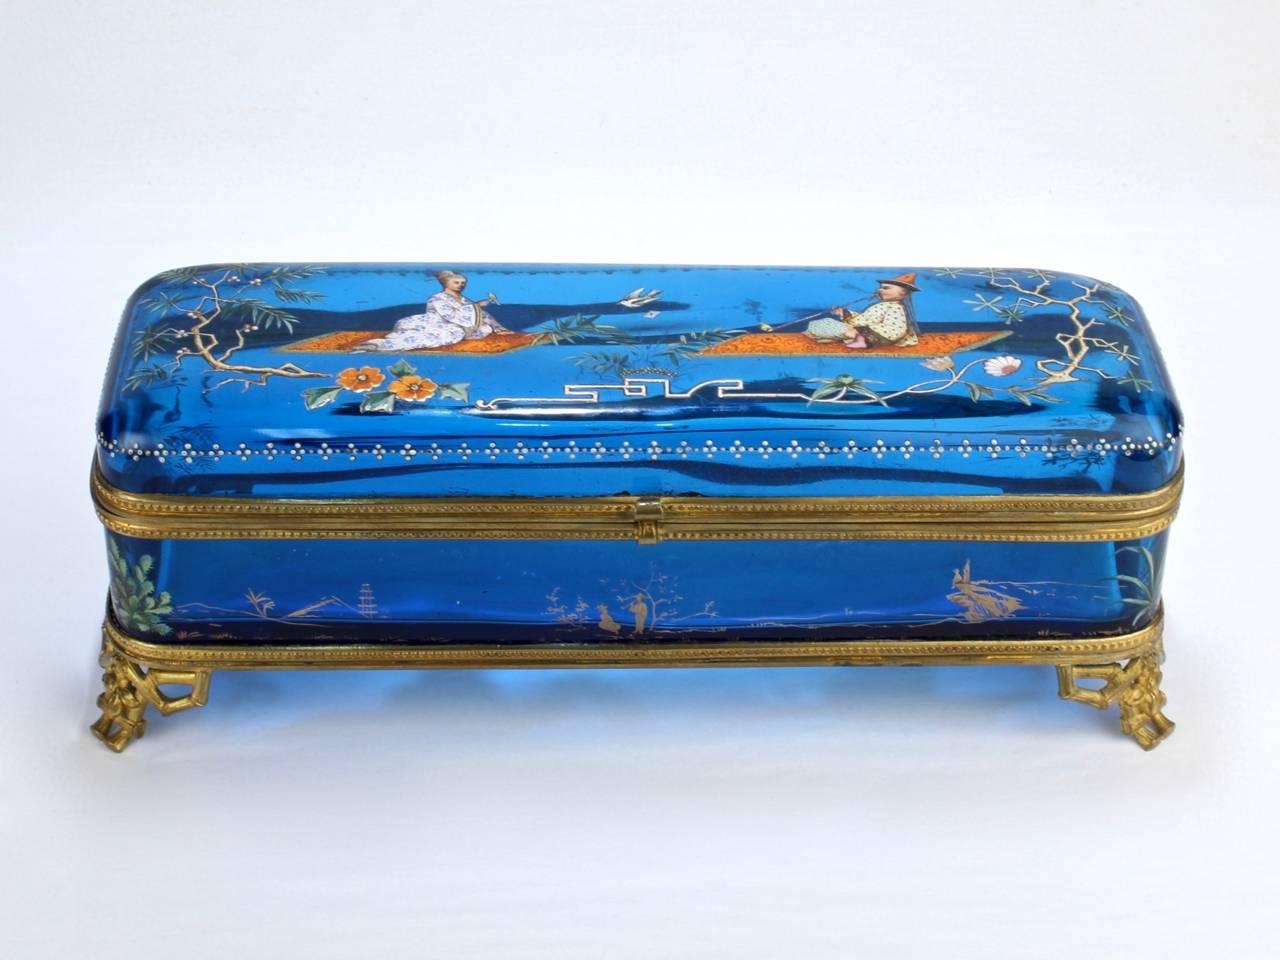 A large and very fine 19th century enameled glass casket or glove box. 

Typical of the enamel treatments by Ludwig Moser and reminiscent of Baccarat's Japonisme works.

Likely Bohemian, the blue glass box is mounted in a gilt bronze frame with